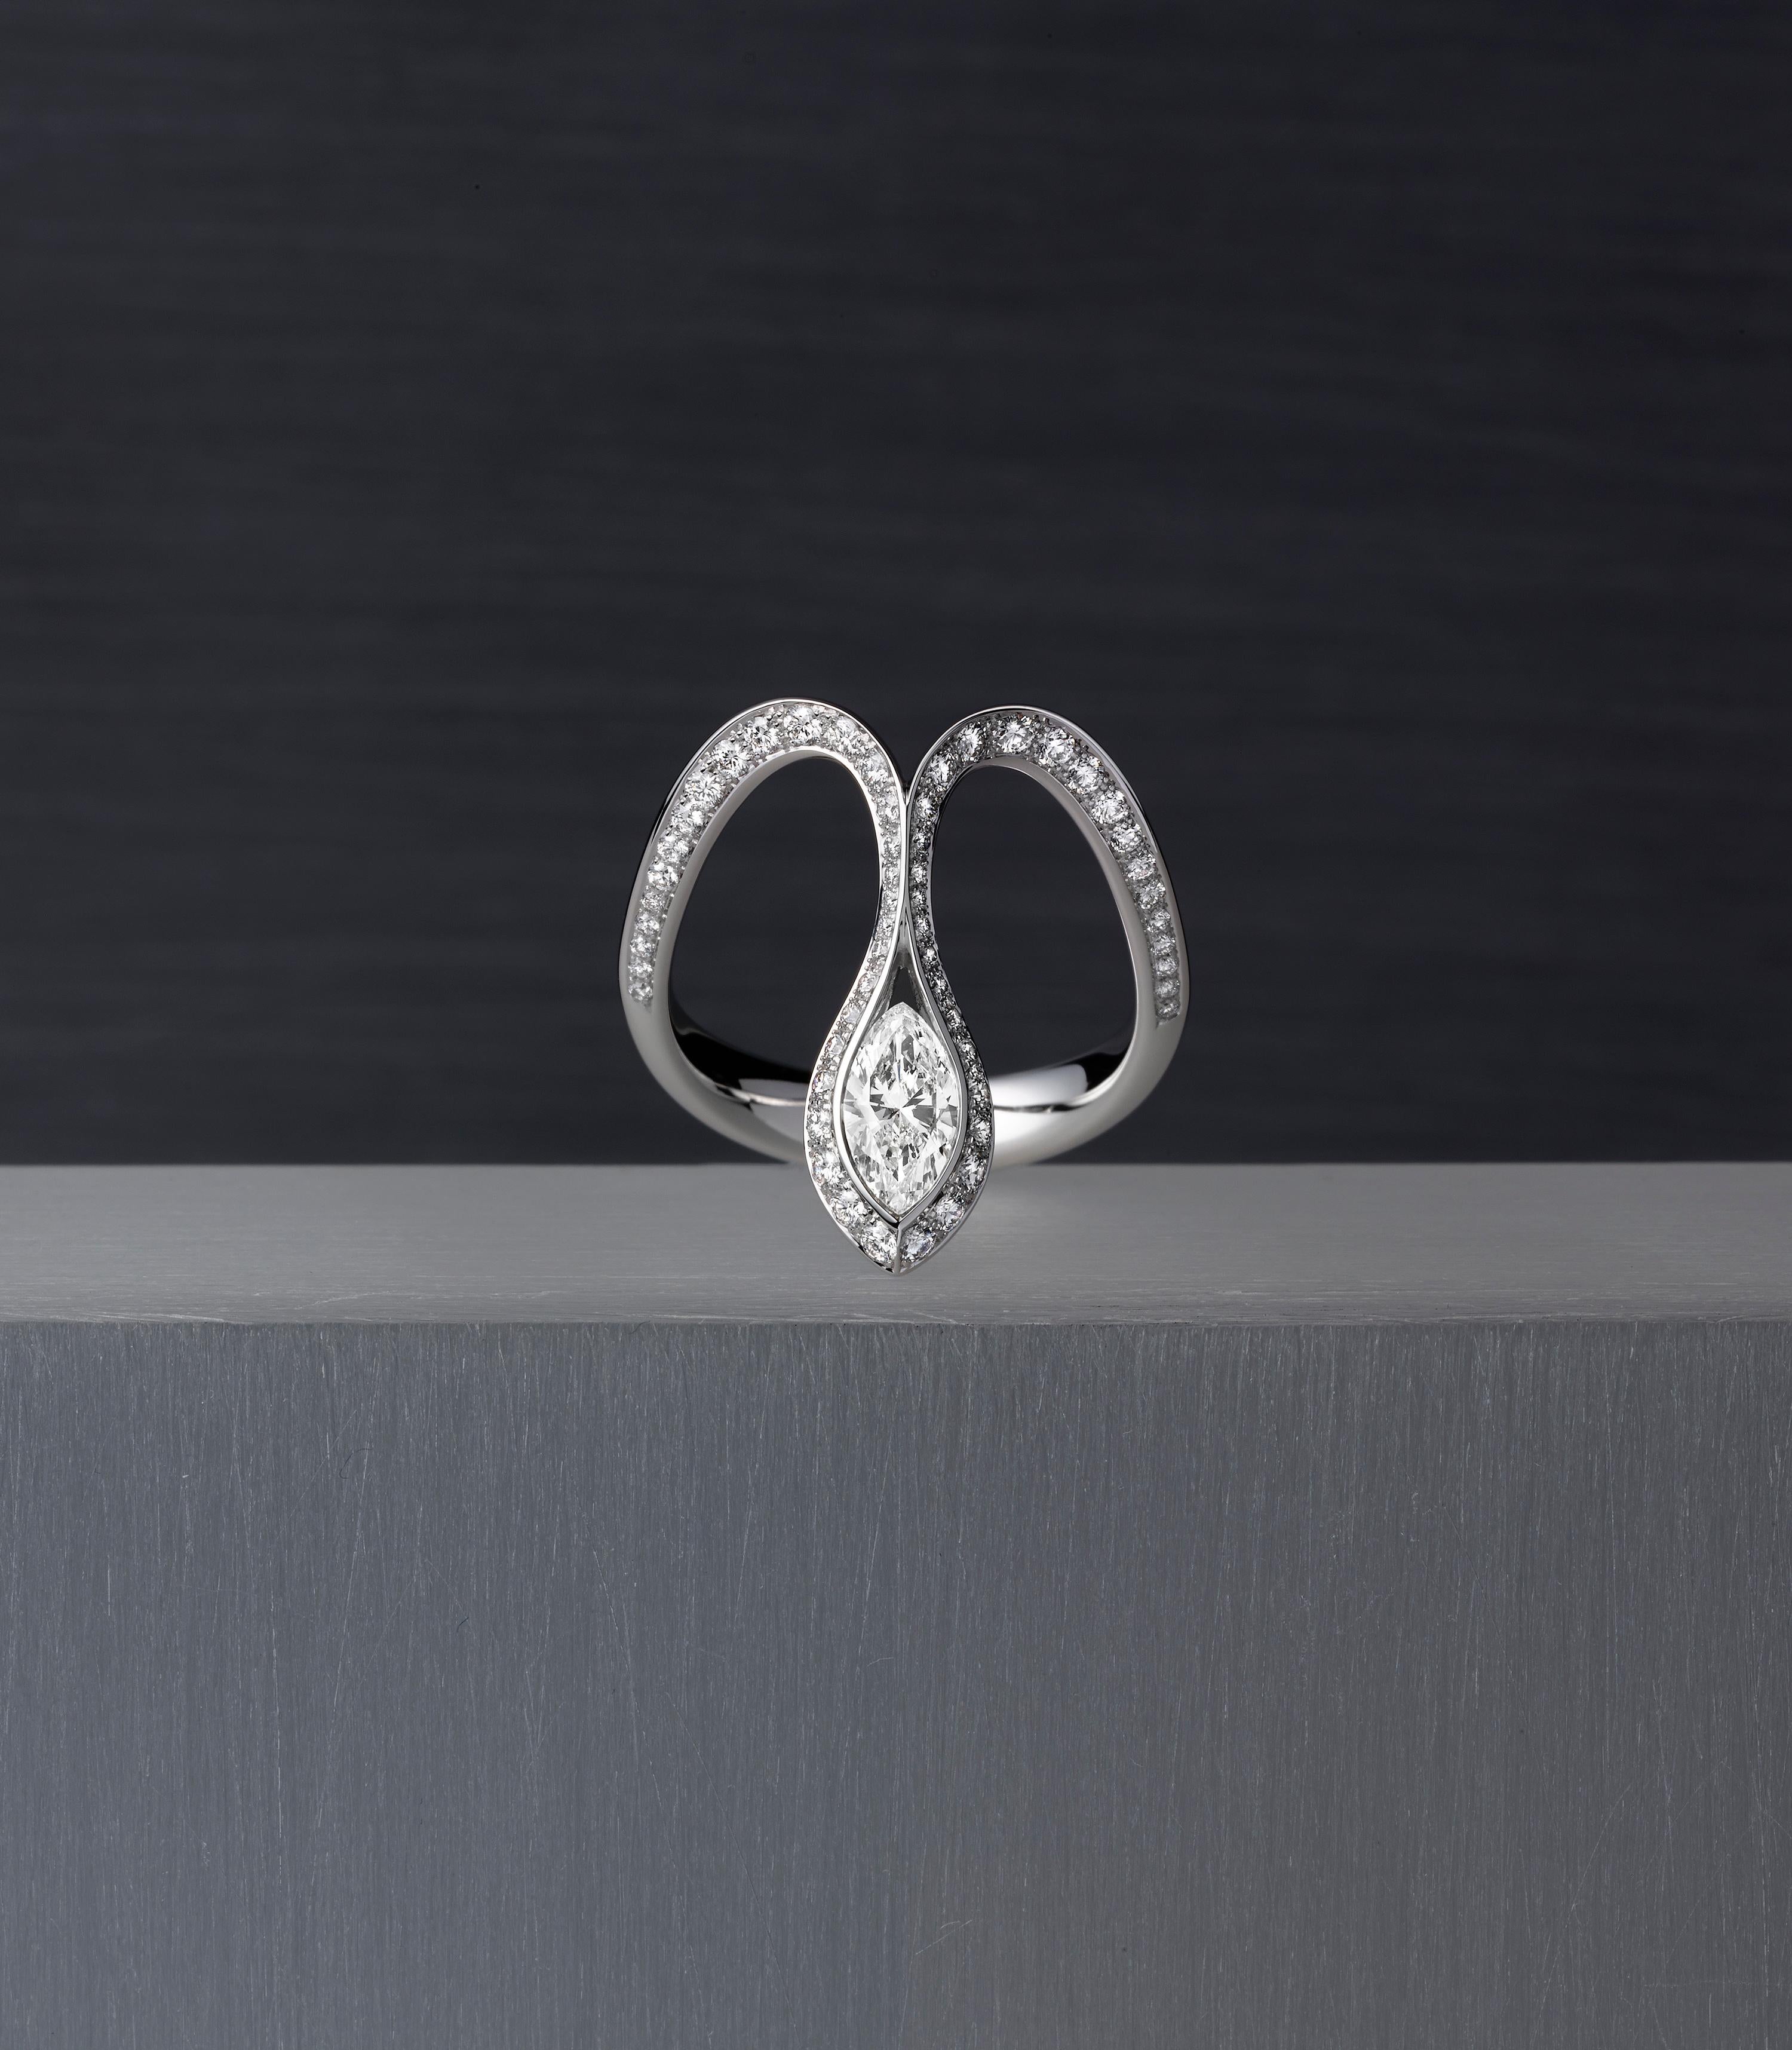 The Royals Is Inspired By Drops Of Light, Dew And Precious Stones, And Like A Vine Of Blossoming Gemstones It Frames The Beauty Of Women. Celebrating A 0.5ct Marquise Diamond, This Ring Royale Gives All Its Meaning To The Word 